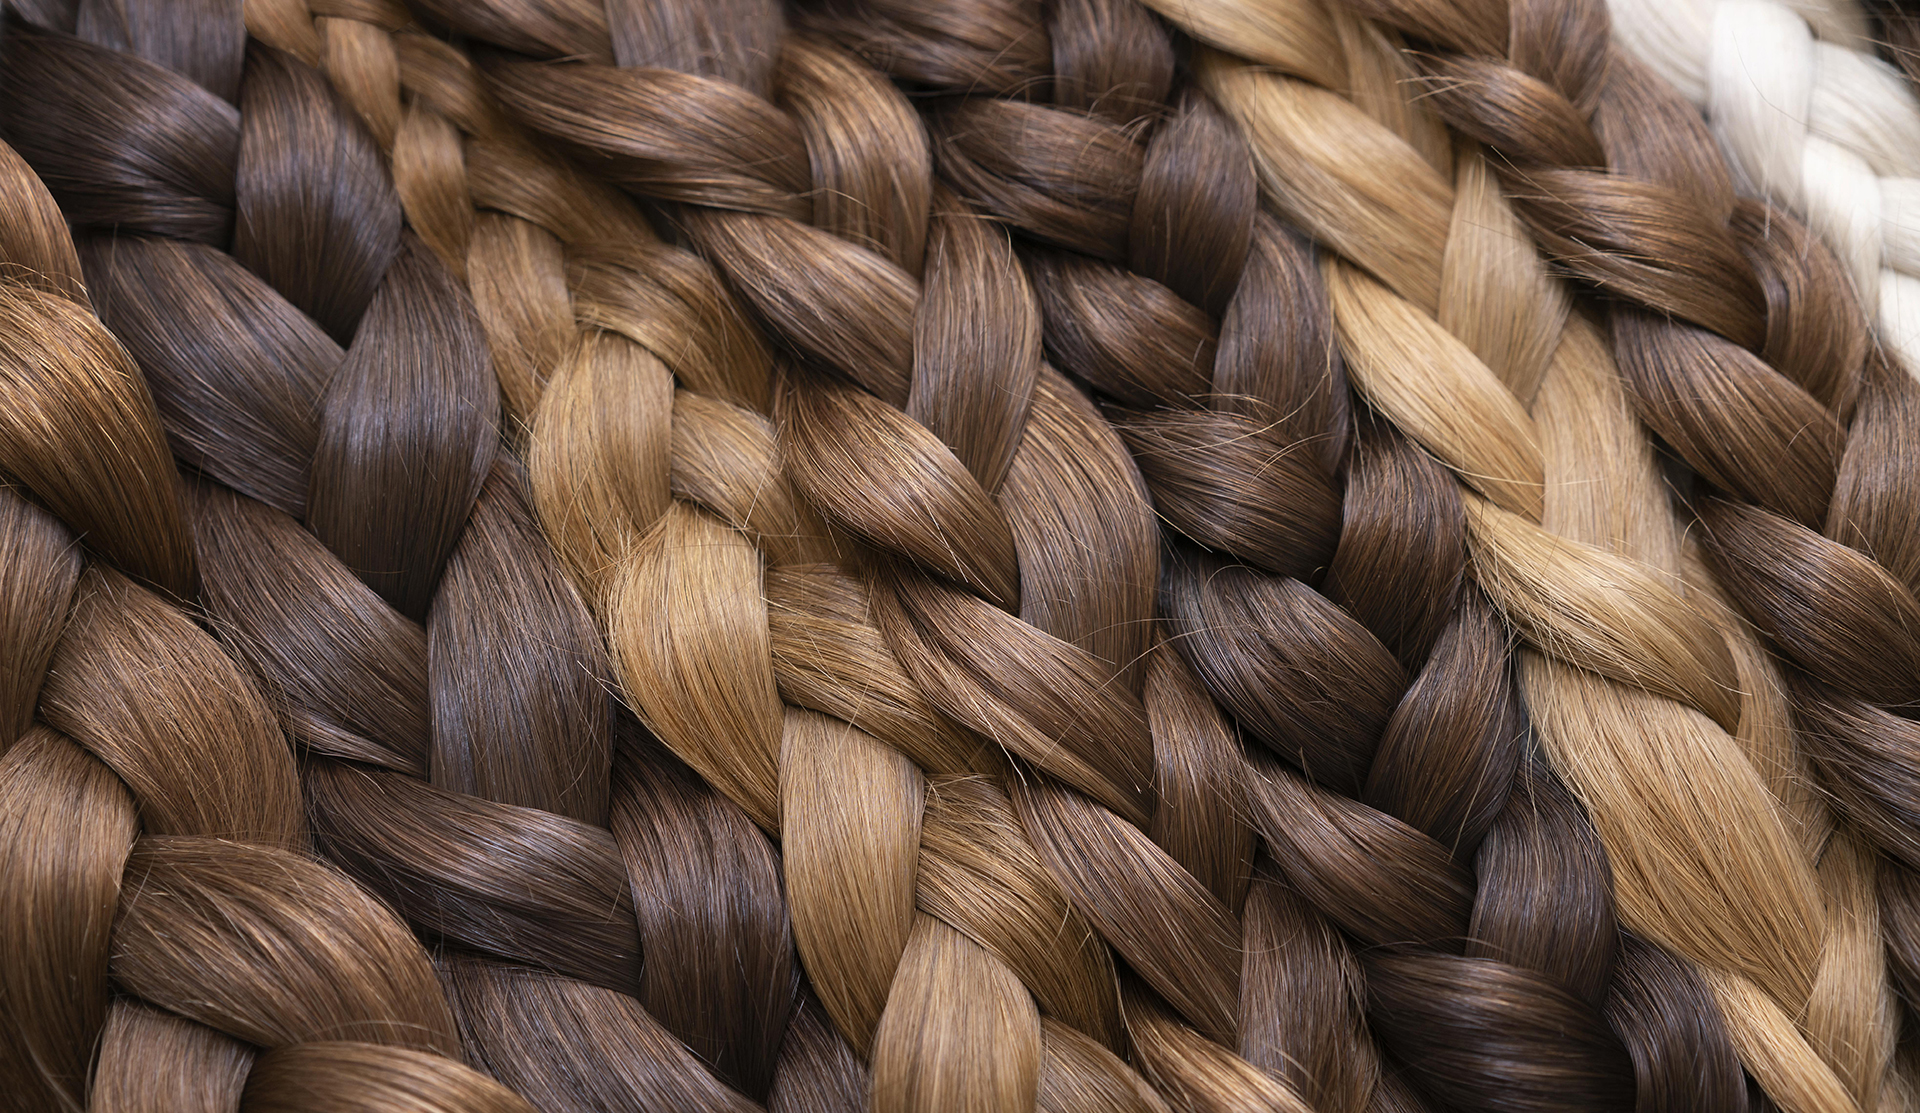 Diagonal braids lying next to each other in different color depths: brown, dark blond, medium blond, light blond and white.